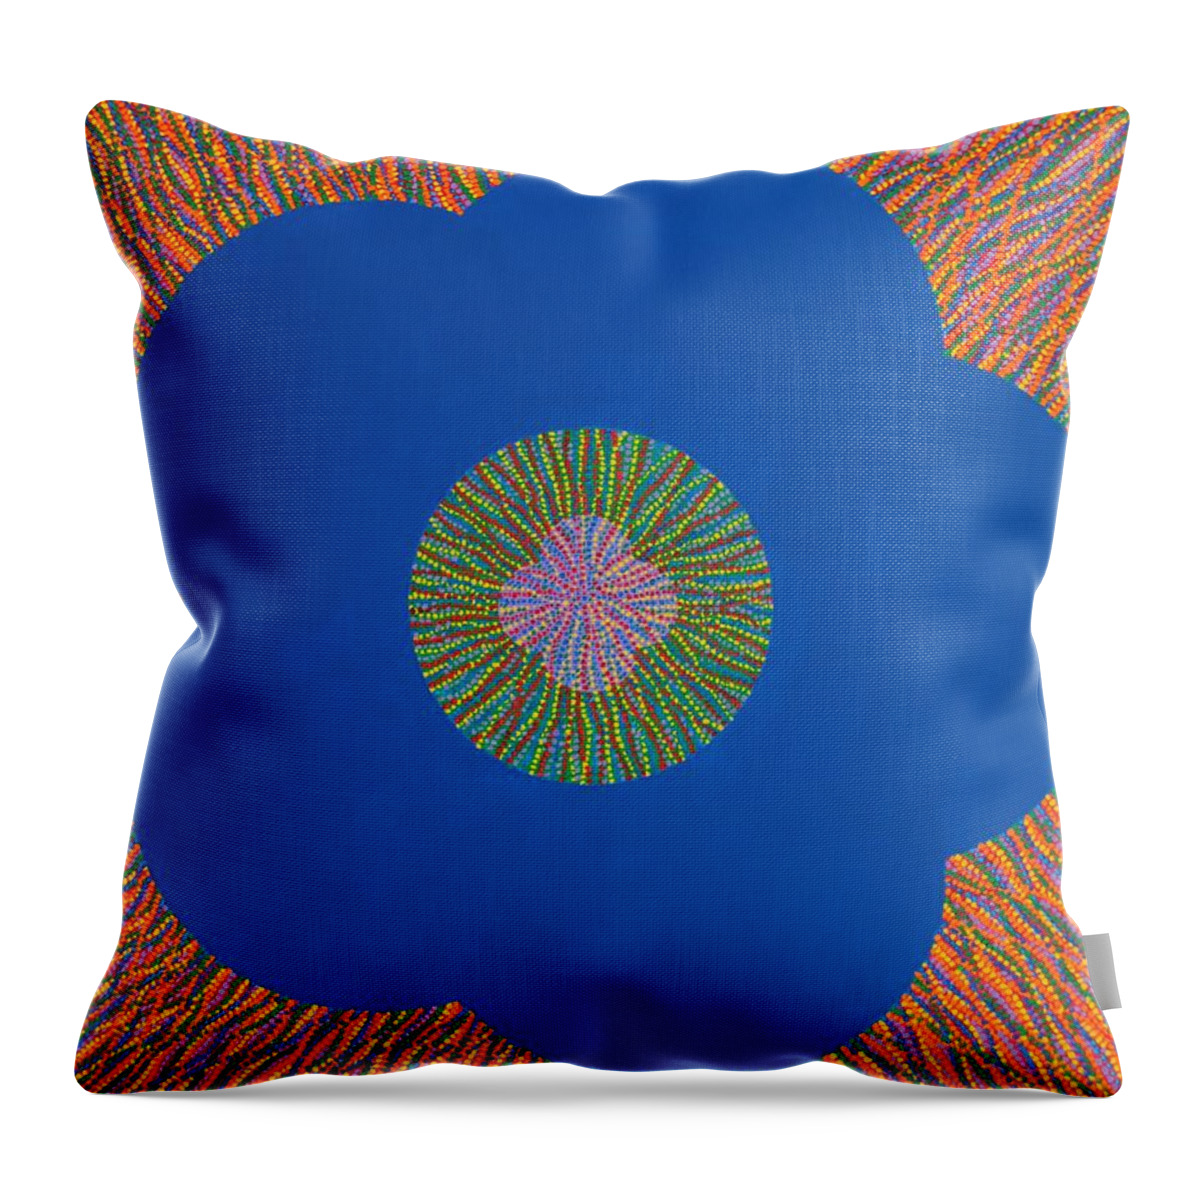 Flower Throw Pillow featuring the painting The Flower 2 by Kyung Hee Hogg